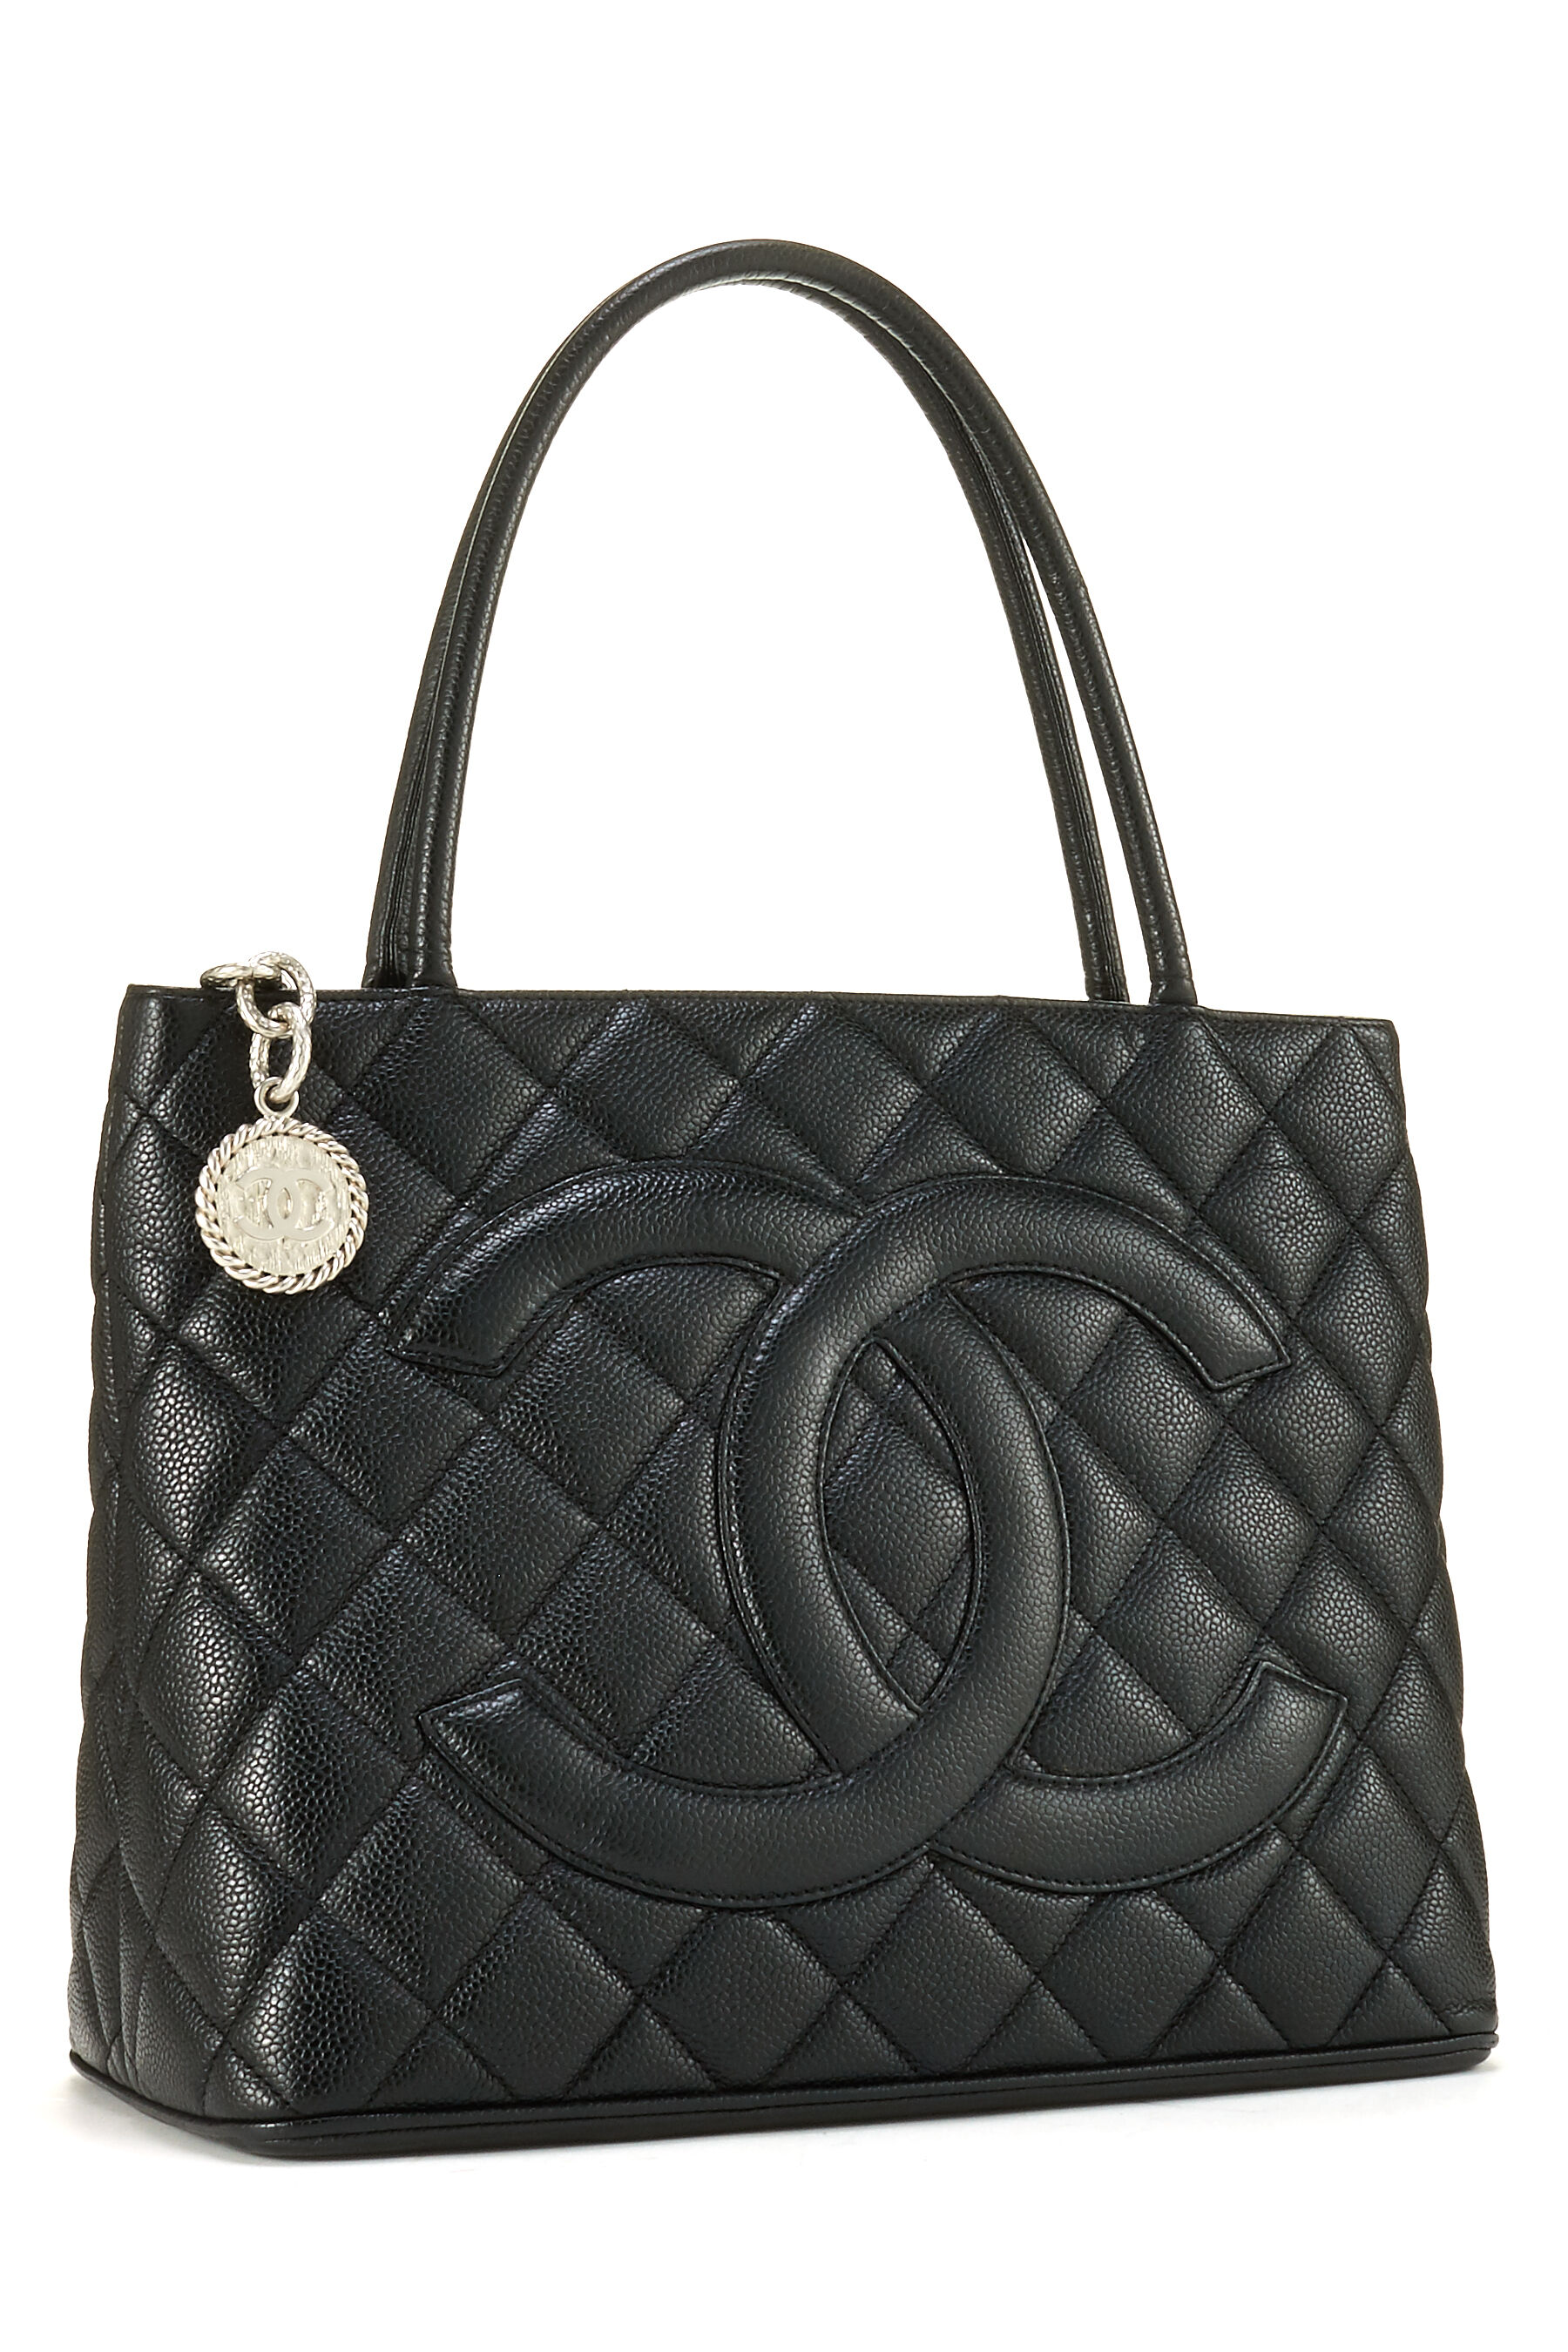 Chanel Black Quilted Caviar Medallion Tote